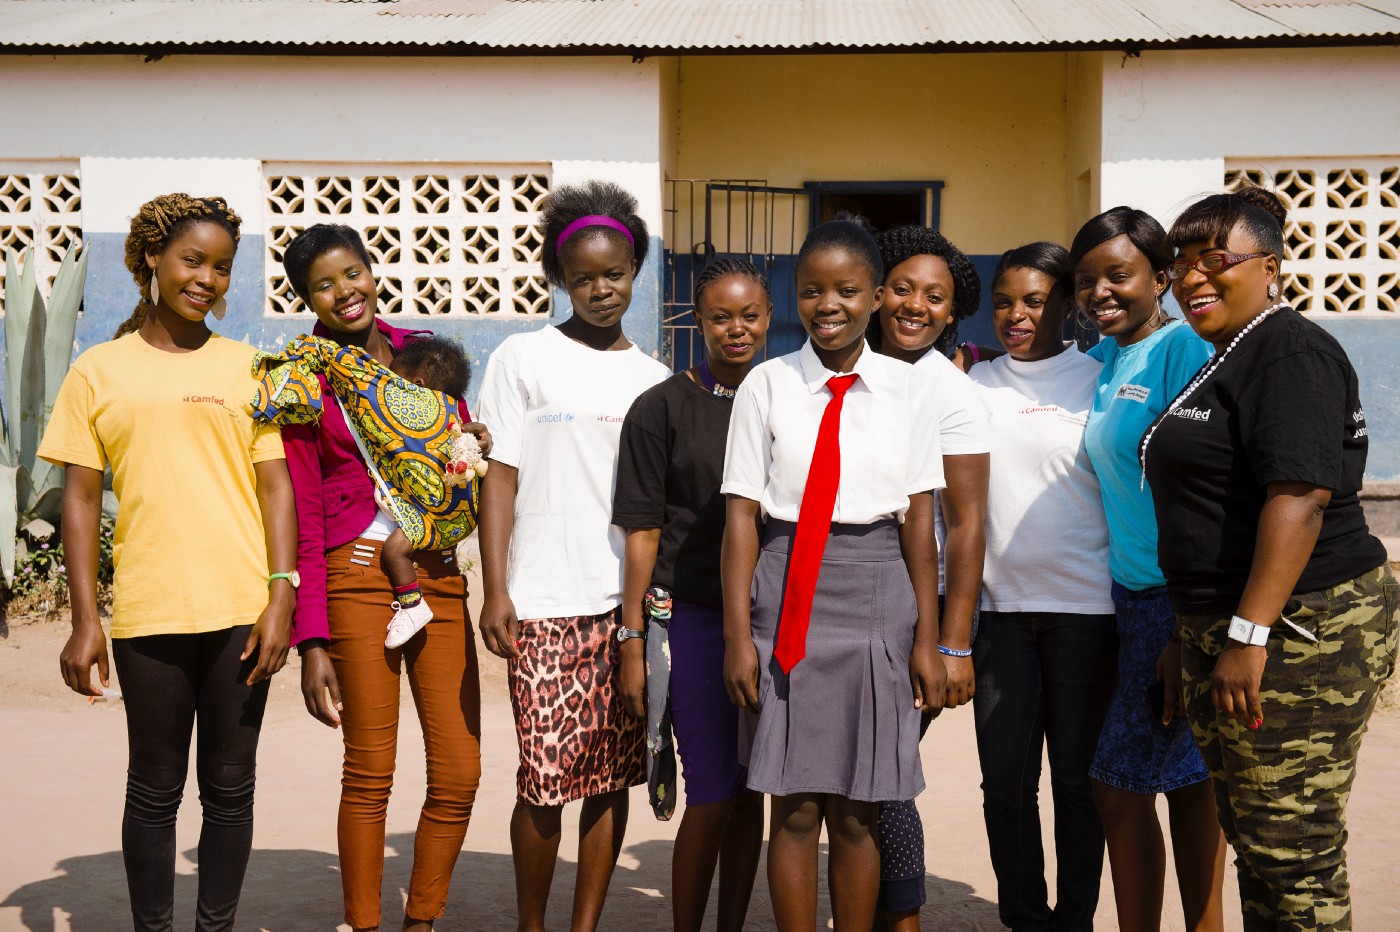 Why community support networks are so important for marginalized girls